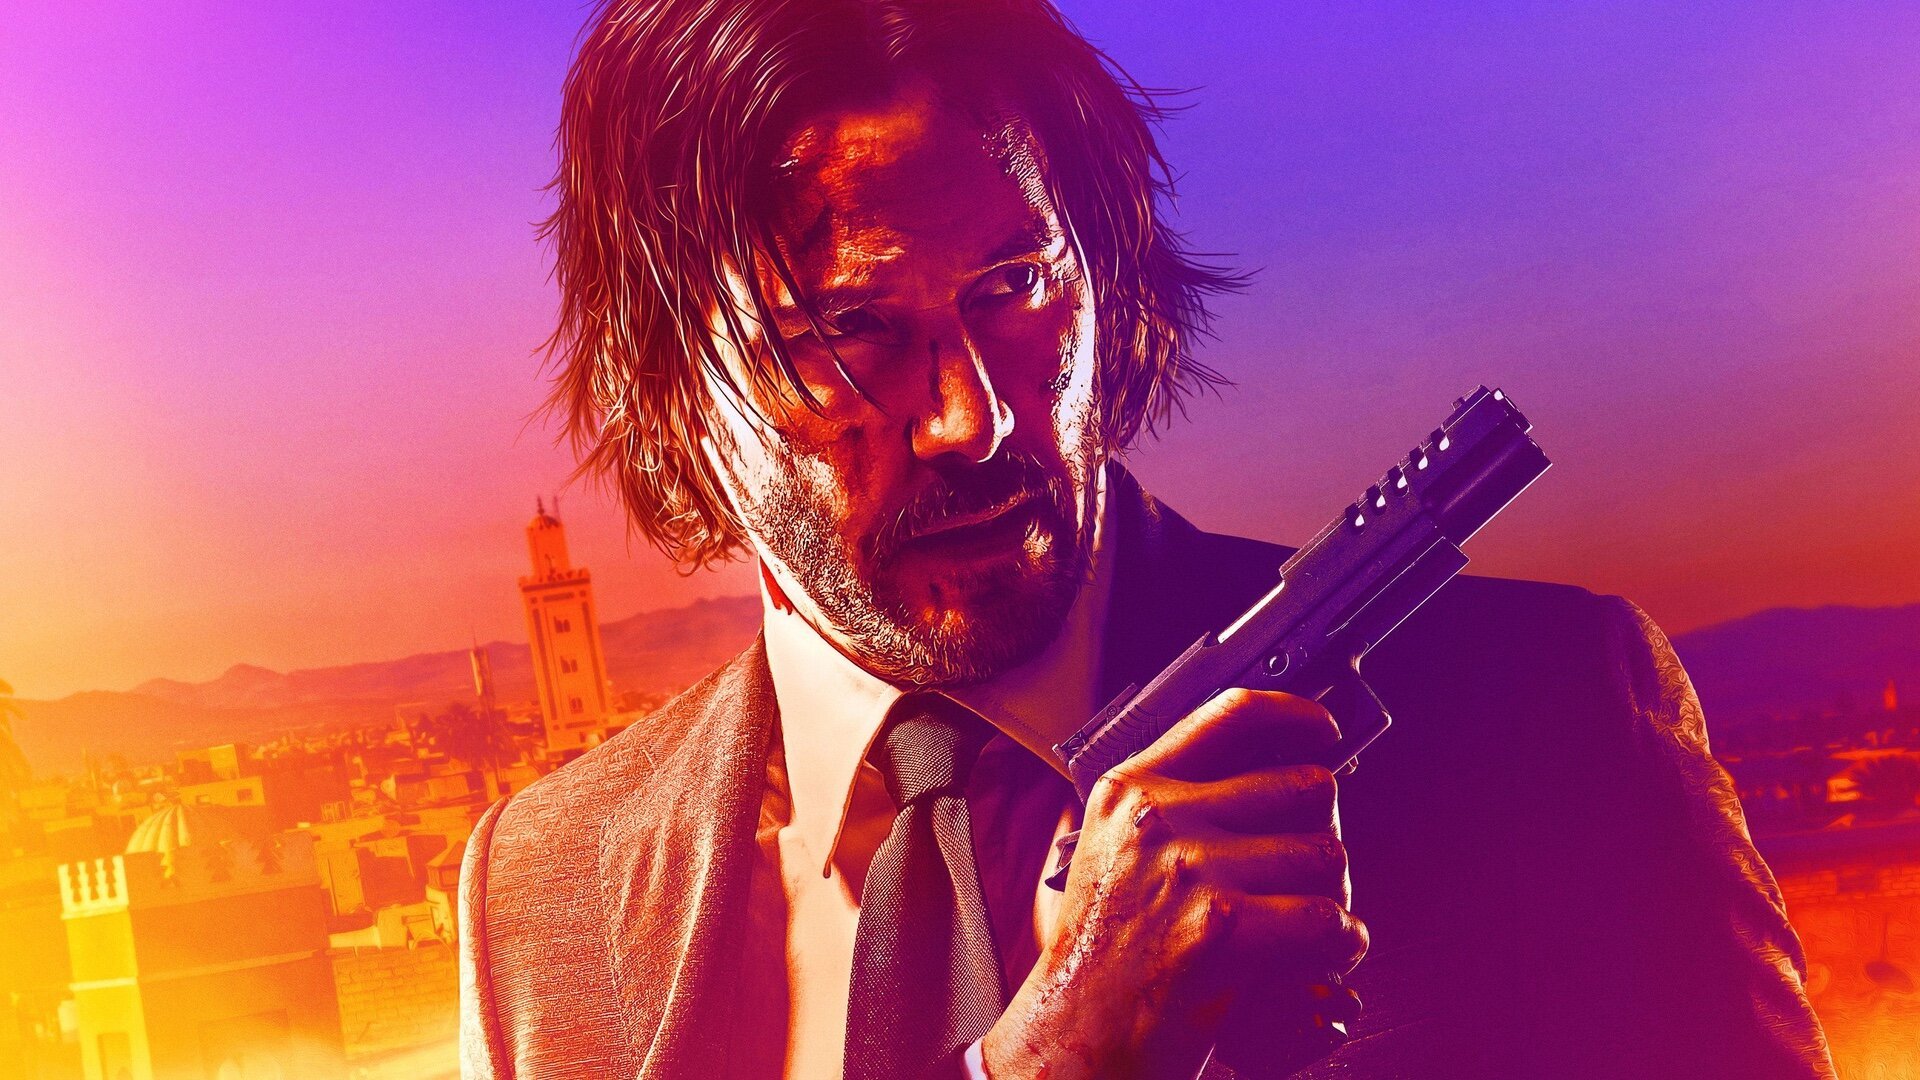 Lionsgate confirms John Wick 5 is happening after planned spin-offs